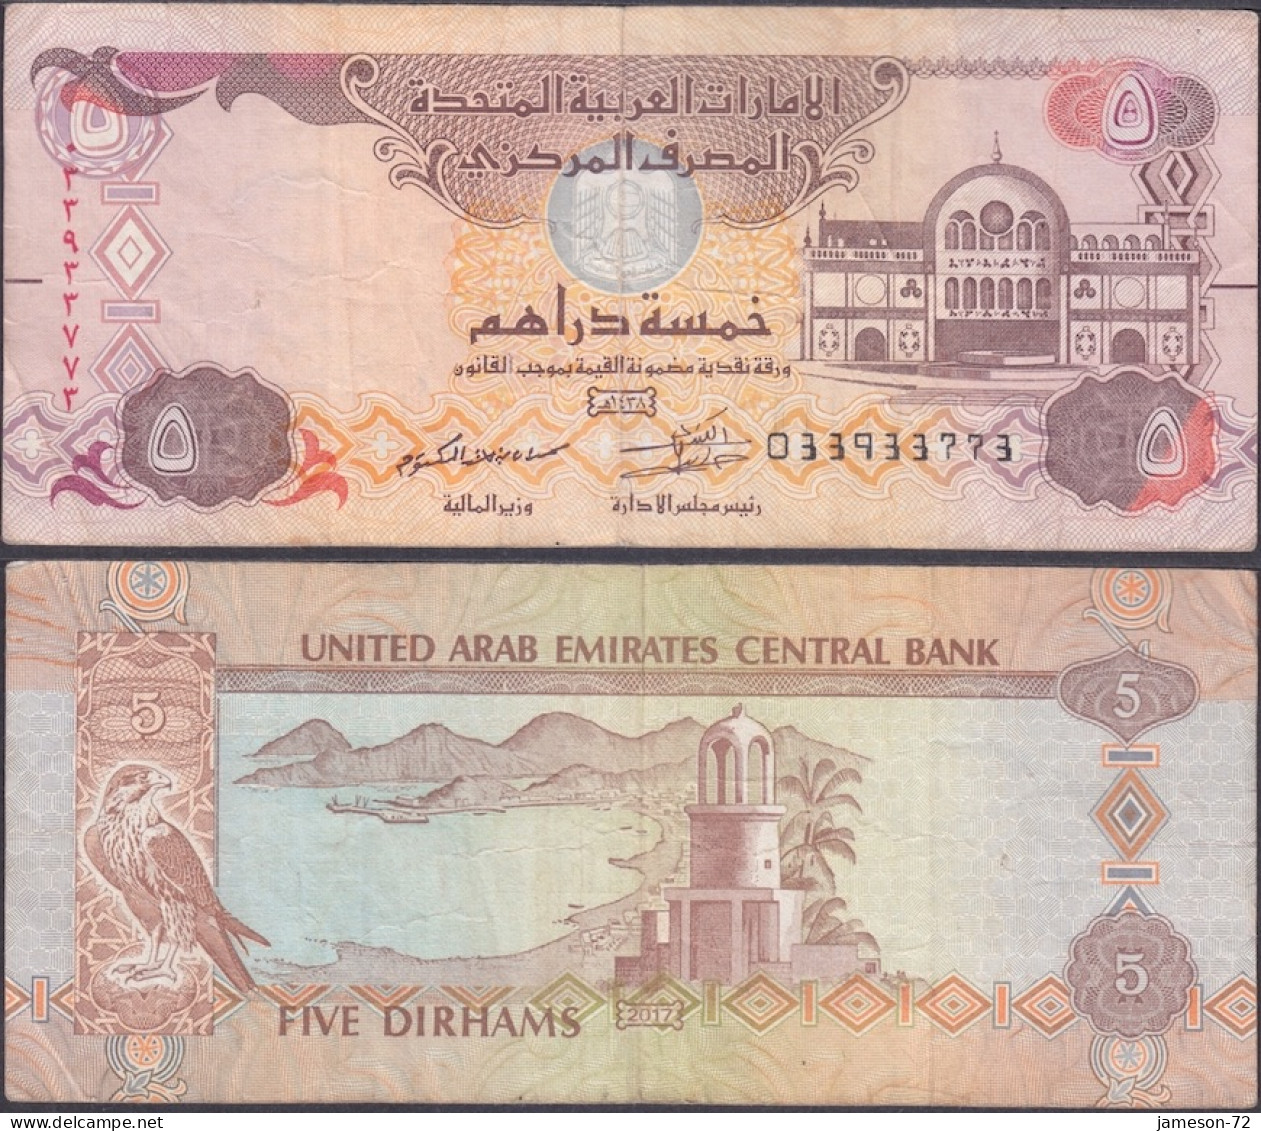 UNITED ARAB EMIRATES - 5 Dirhams AH 1438 2017AD P# 26d Middle East Banknote - Edelweiss Coins - Ver. Arab. Emirate